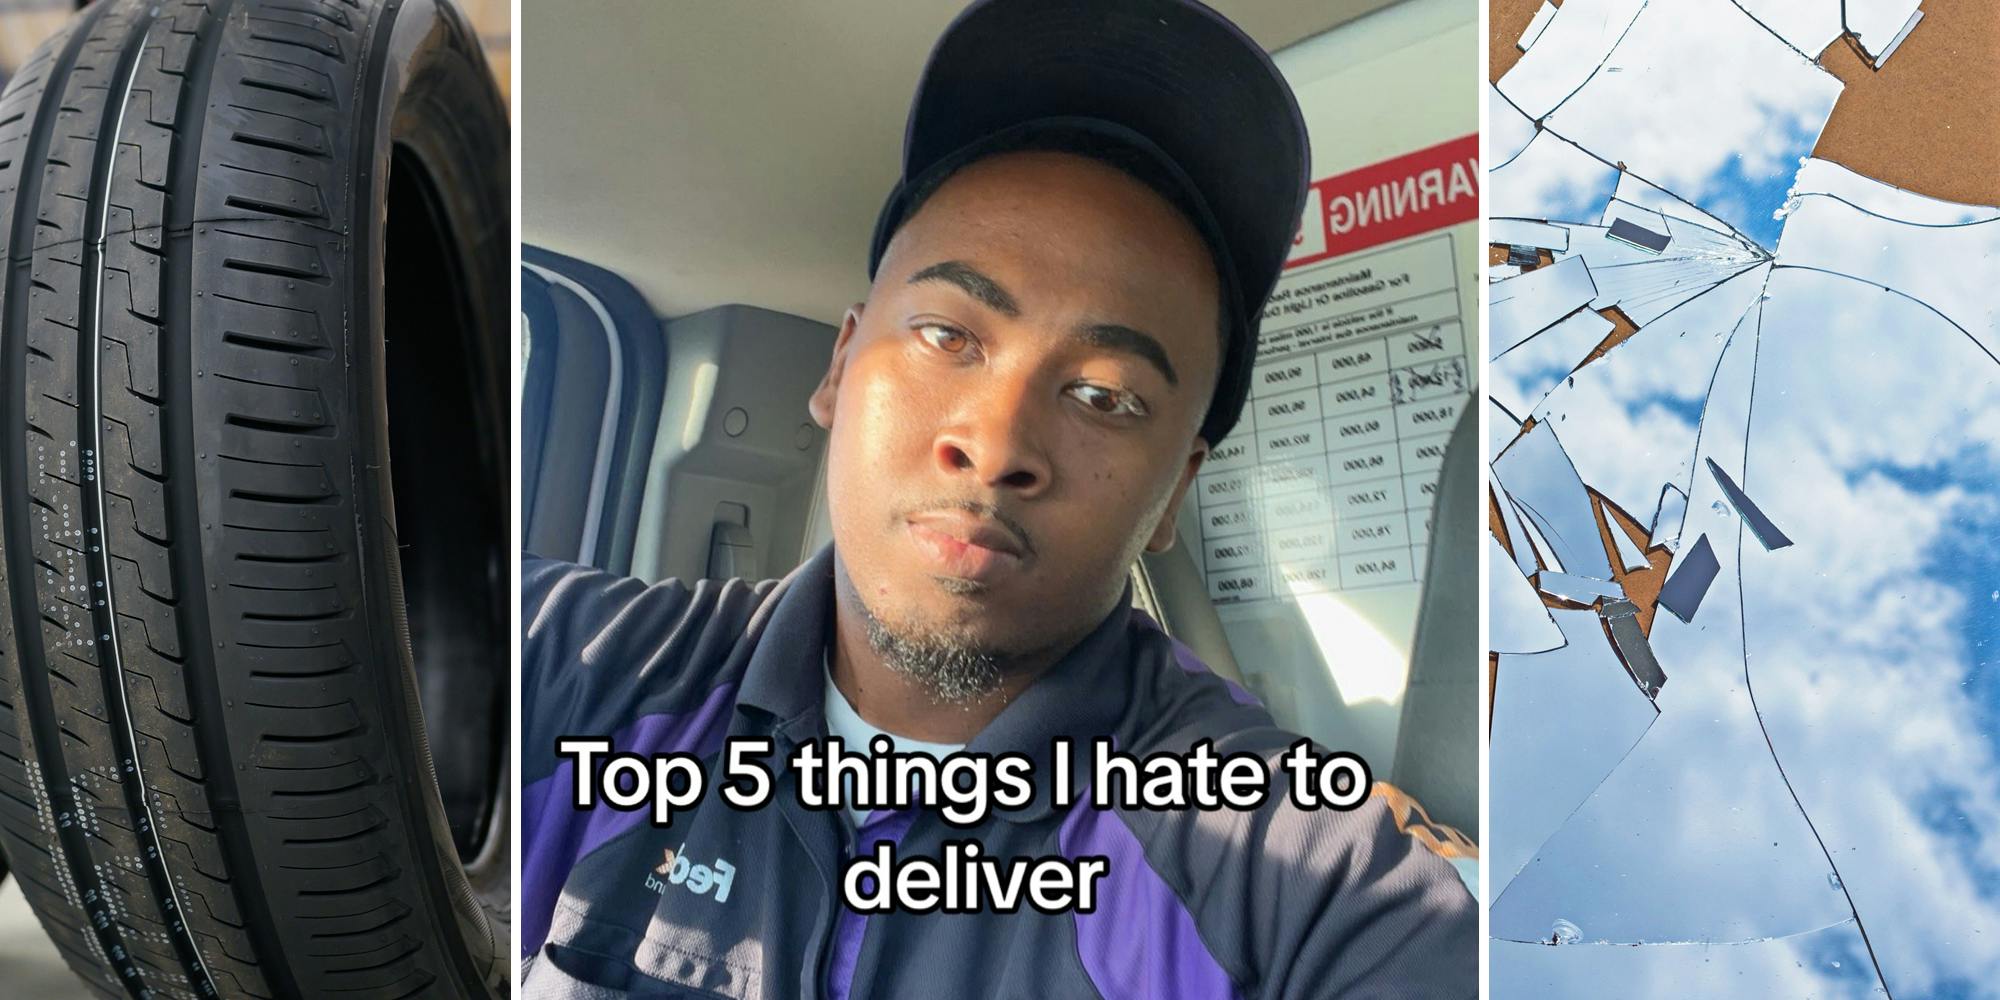 tires (l) FedEx delivery driver with caption "Top 5 things I hate to deliver" (c) broken mirror (r)